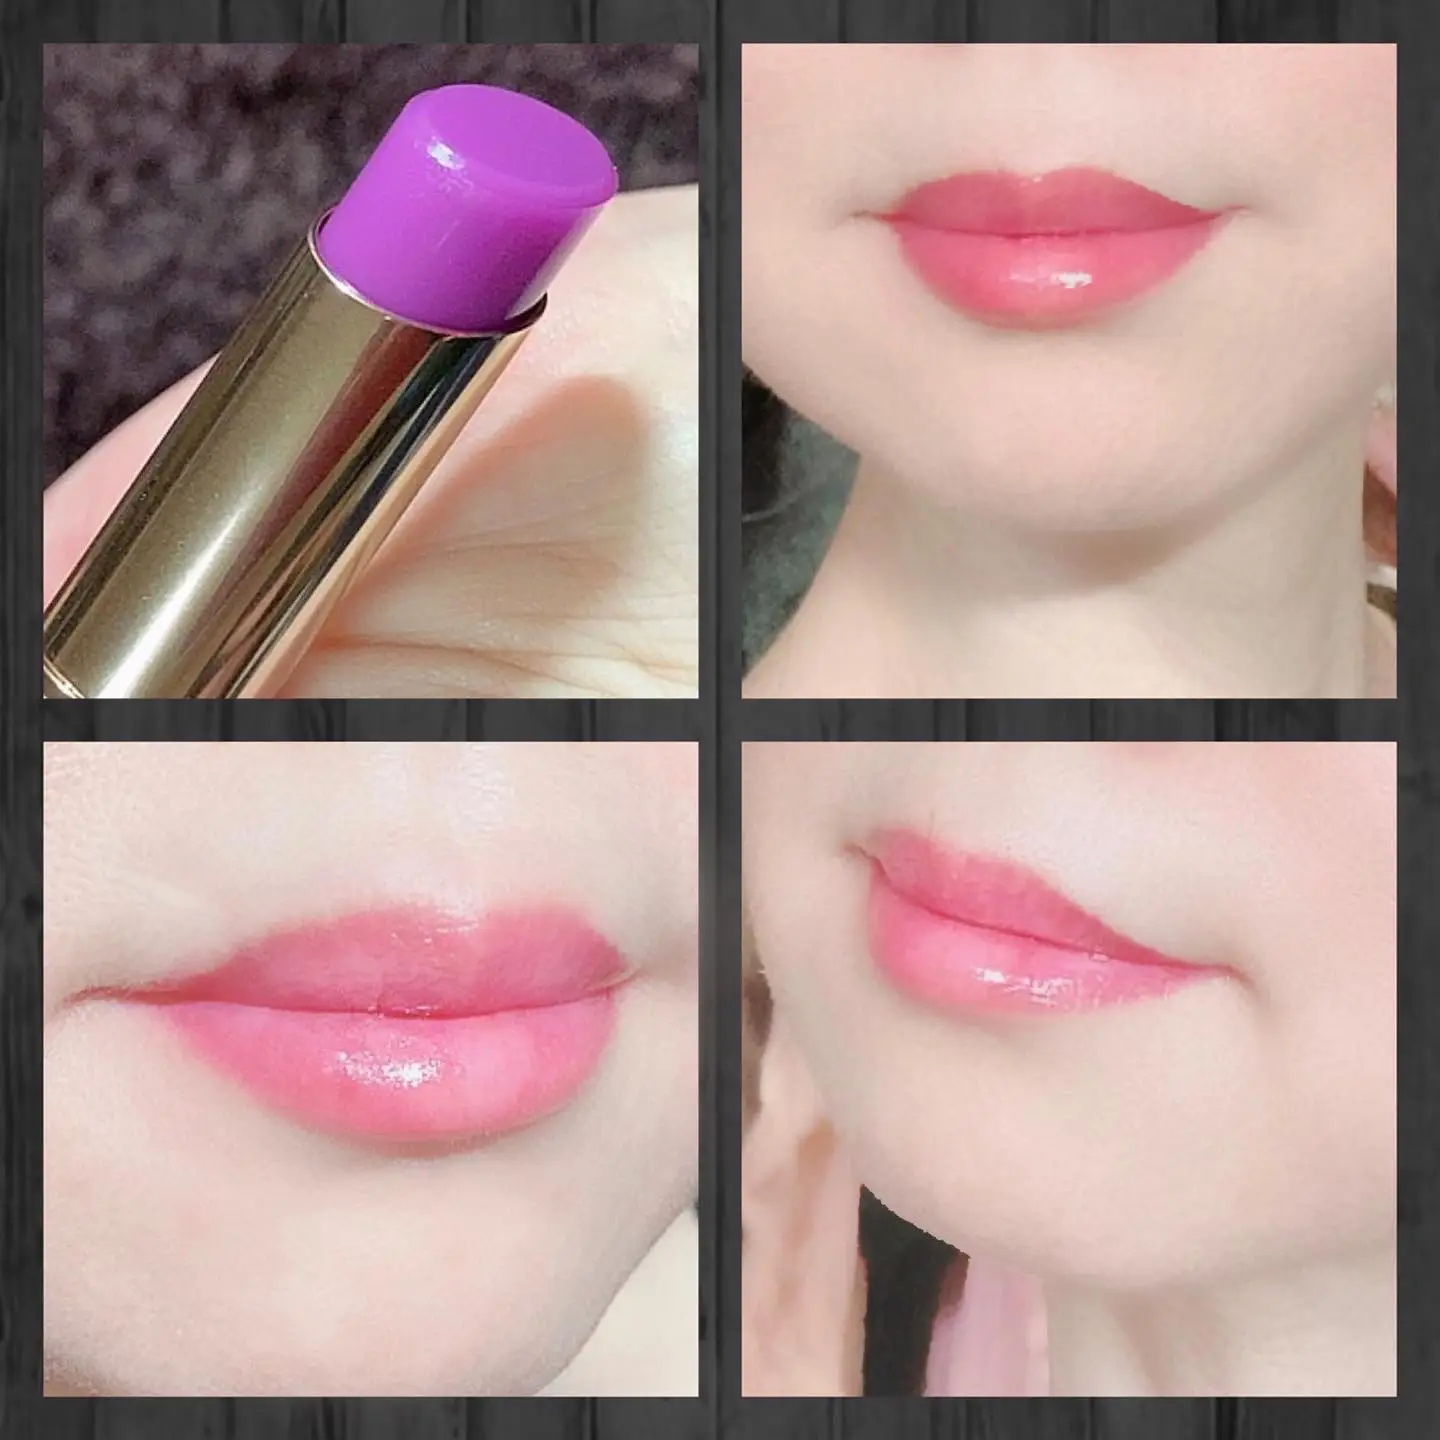 Limited color of OPERA💜💜 | Gallery posted by yukiko15 | Lemon8